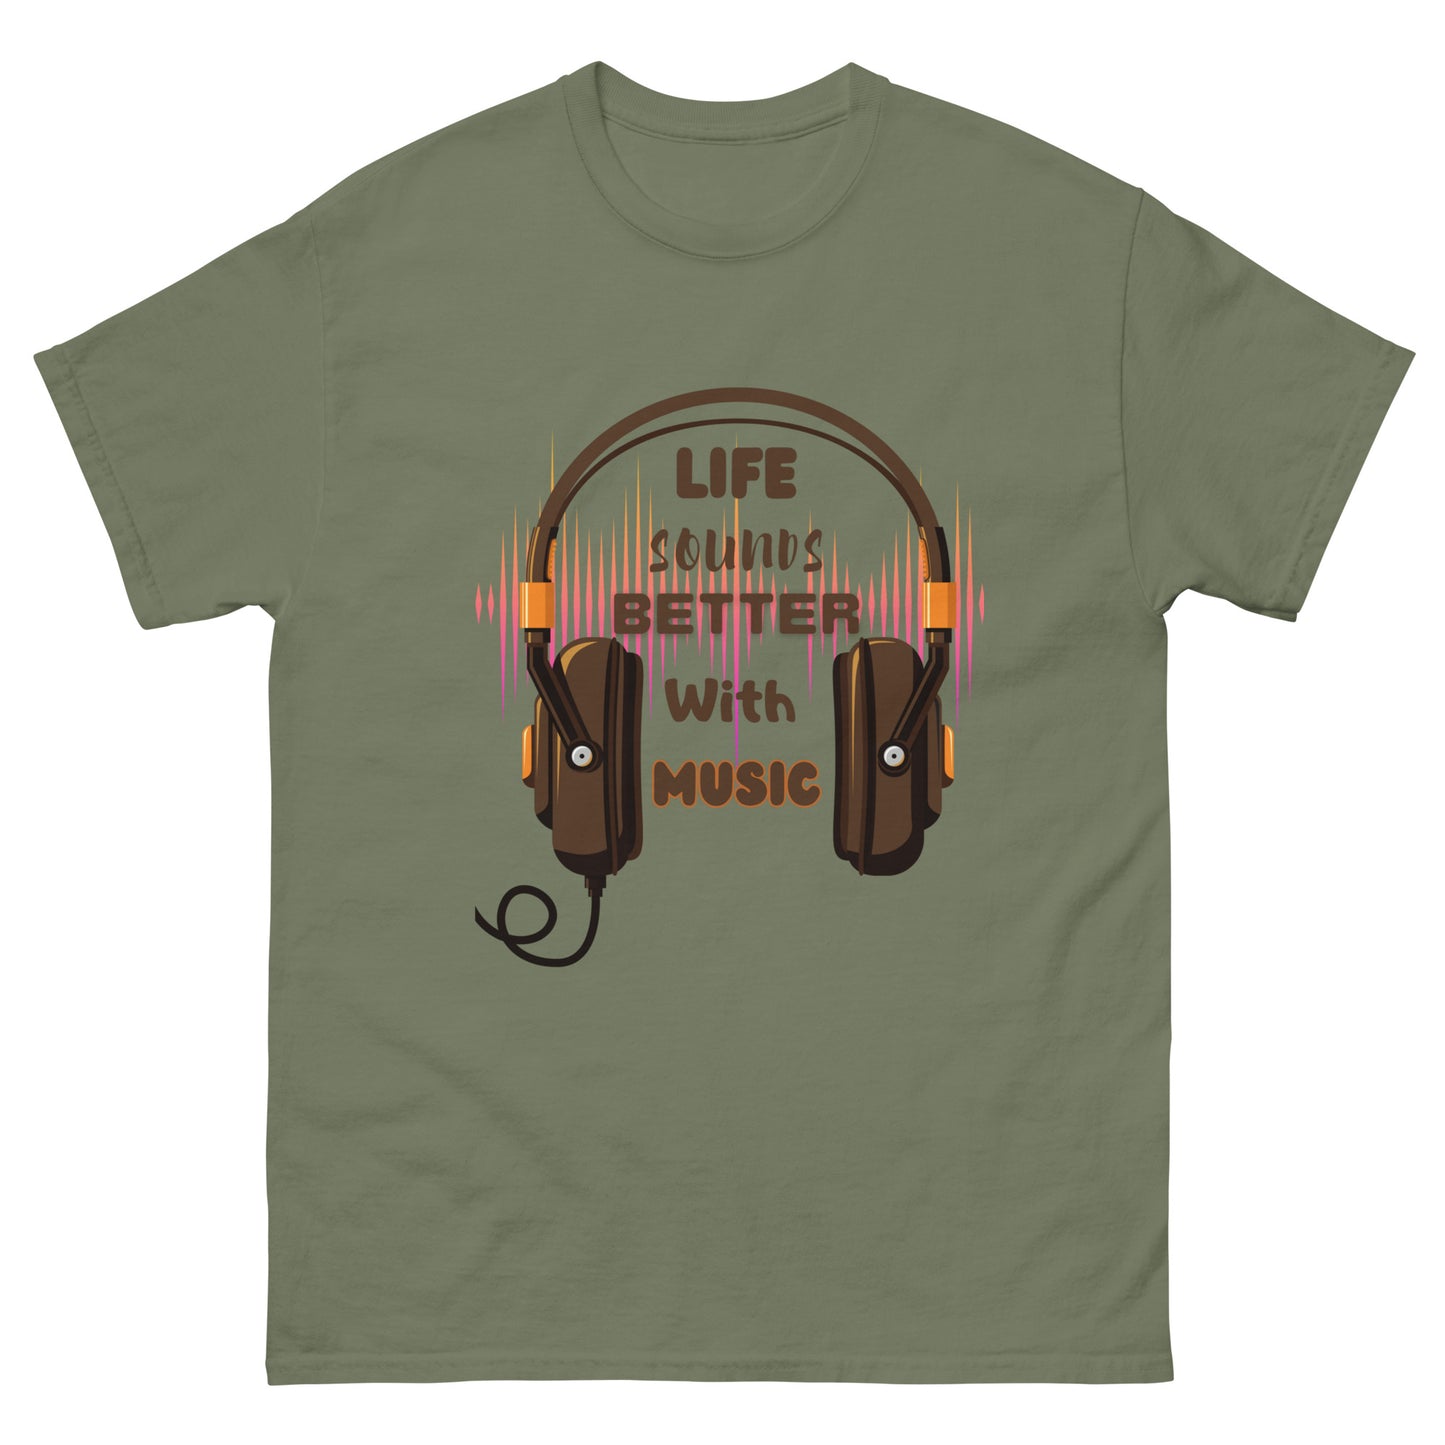 "Life Sounds Better With Music"  Unisex classic tee